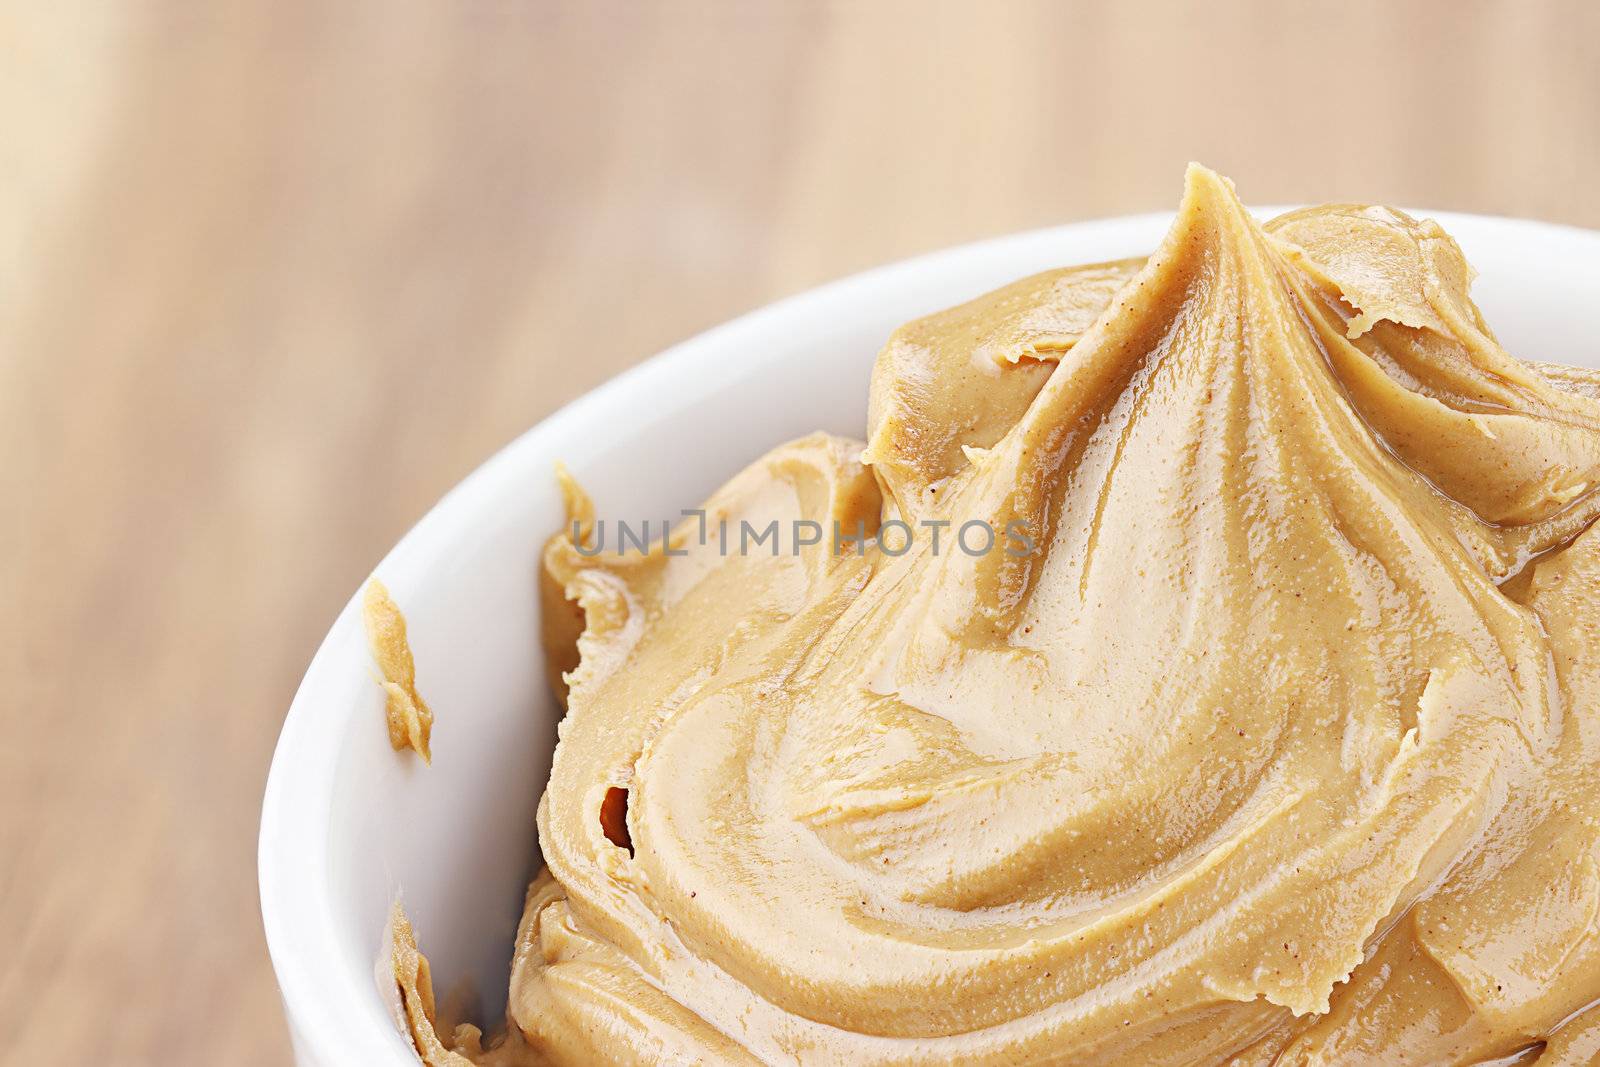 Creamy peanut butter in a dish with shallow depth of field.
